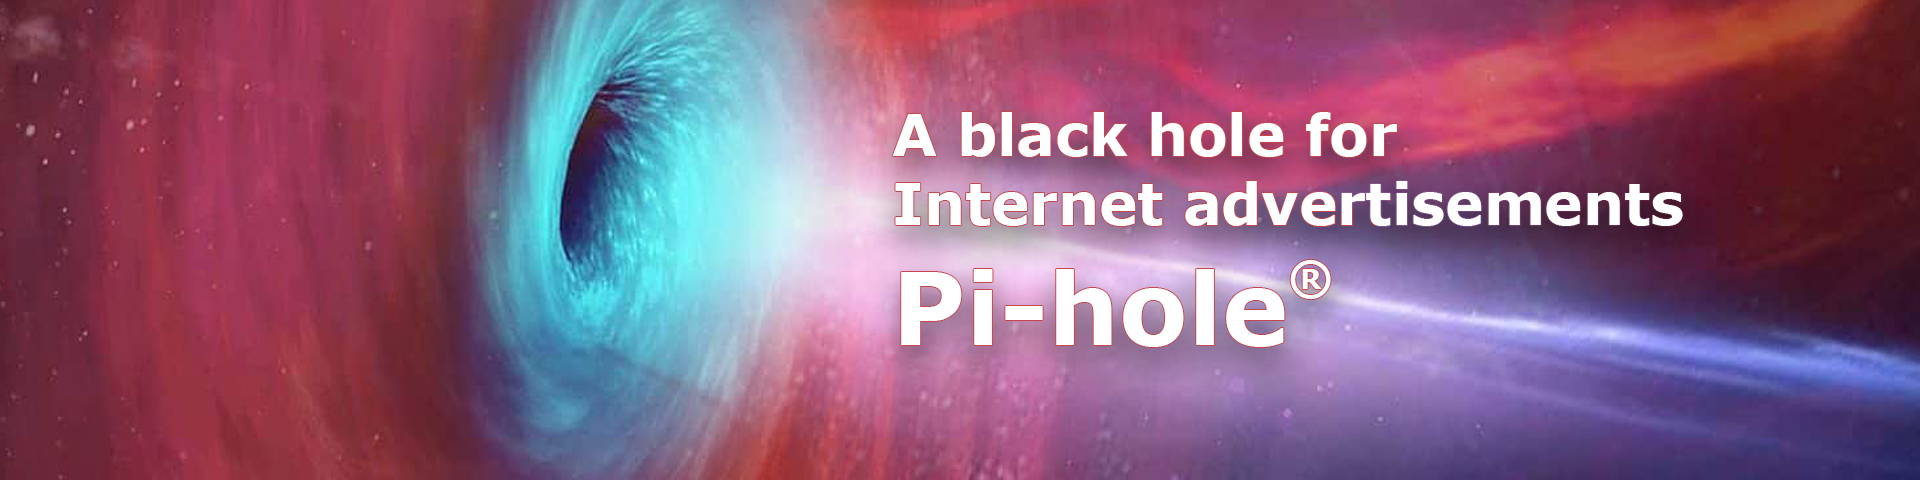 No more advertising on your network with Pi-hole